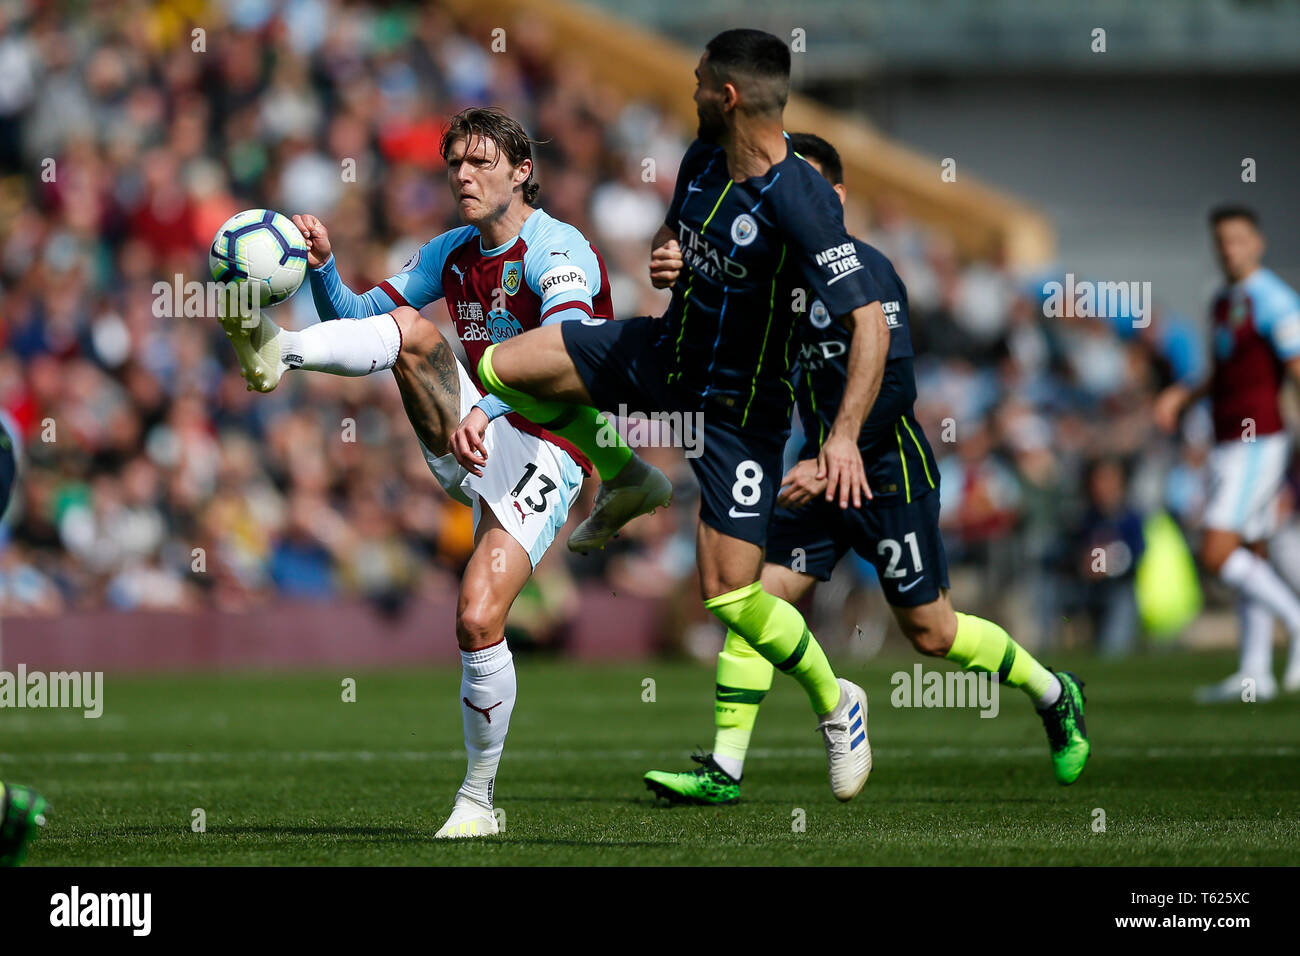 Burnley, UK. 28th Apr, 2019. Jeff Hendrick of Burnley and Ilkay Gundogan of Manchester City during the Premier League match between Burnley and Manchester City at Turf Moor on April 28th 2019. Credit: PHC Images/Alamy Live News Stock Photo